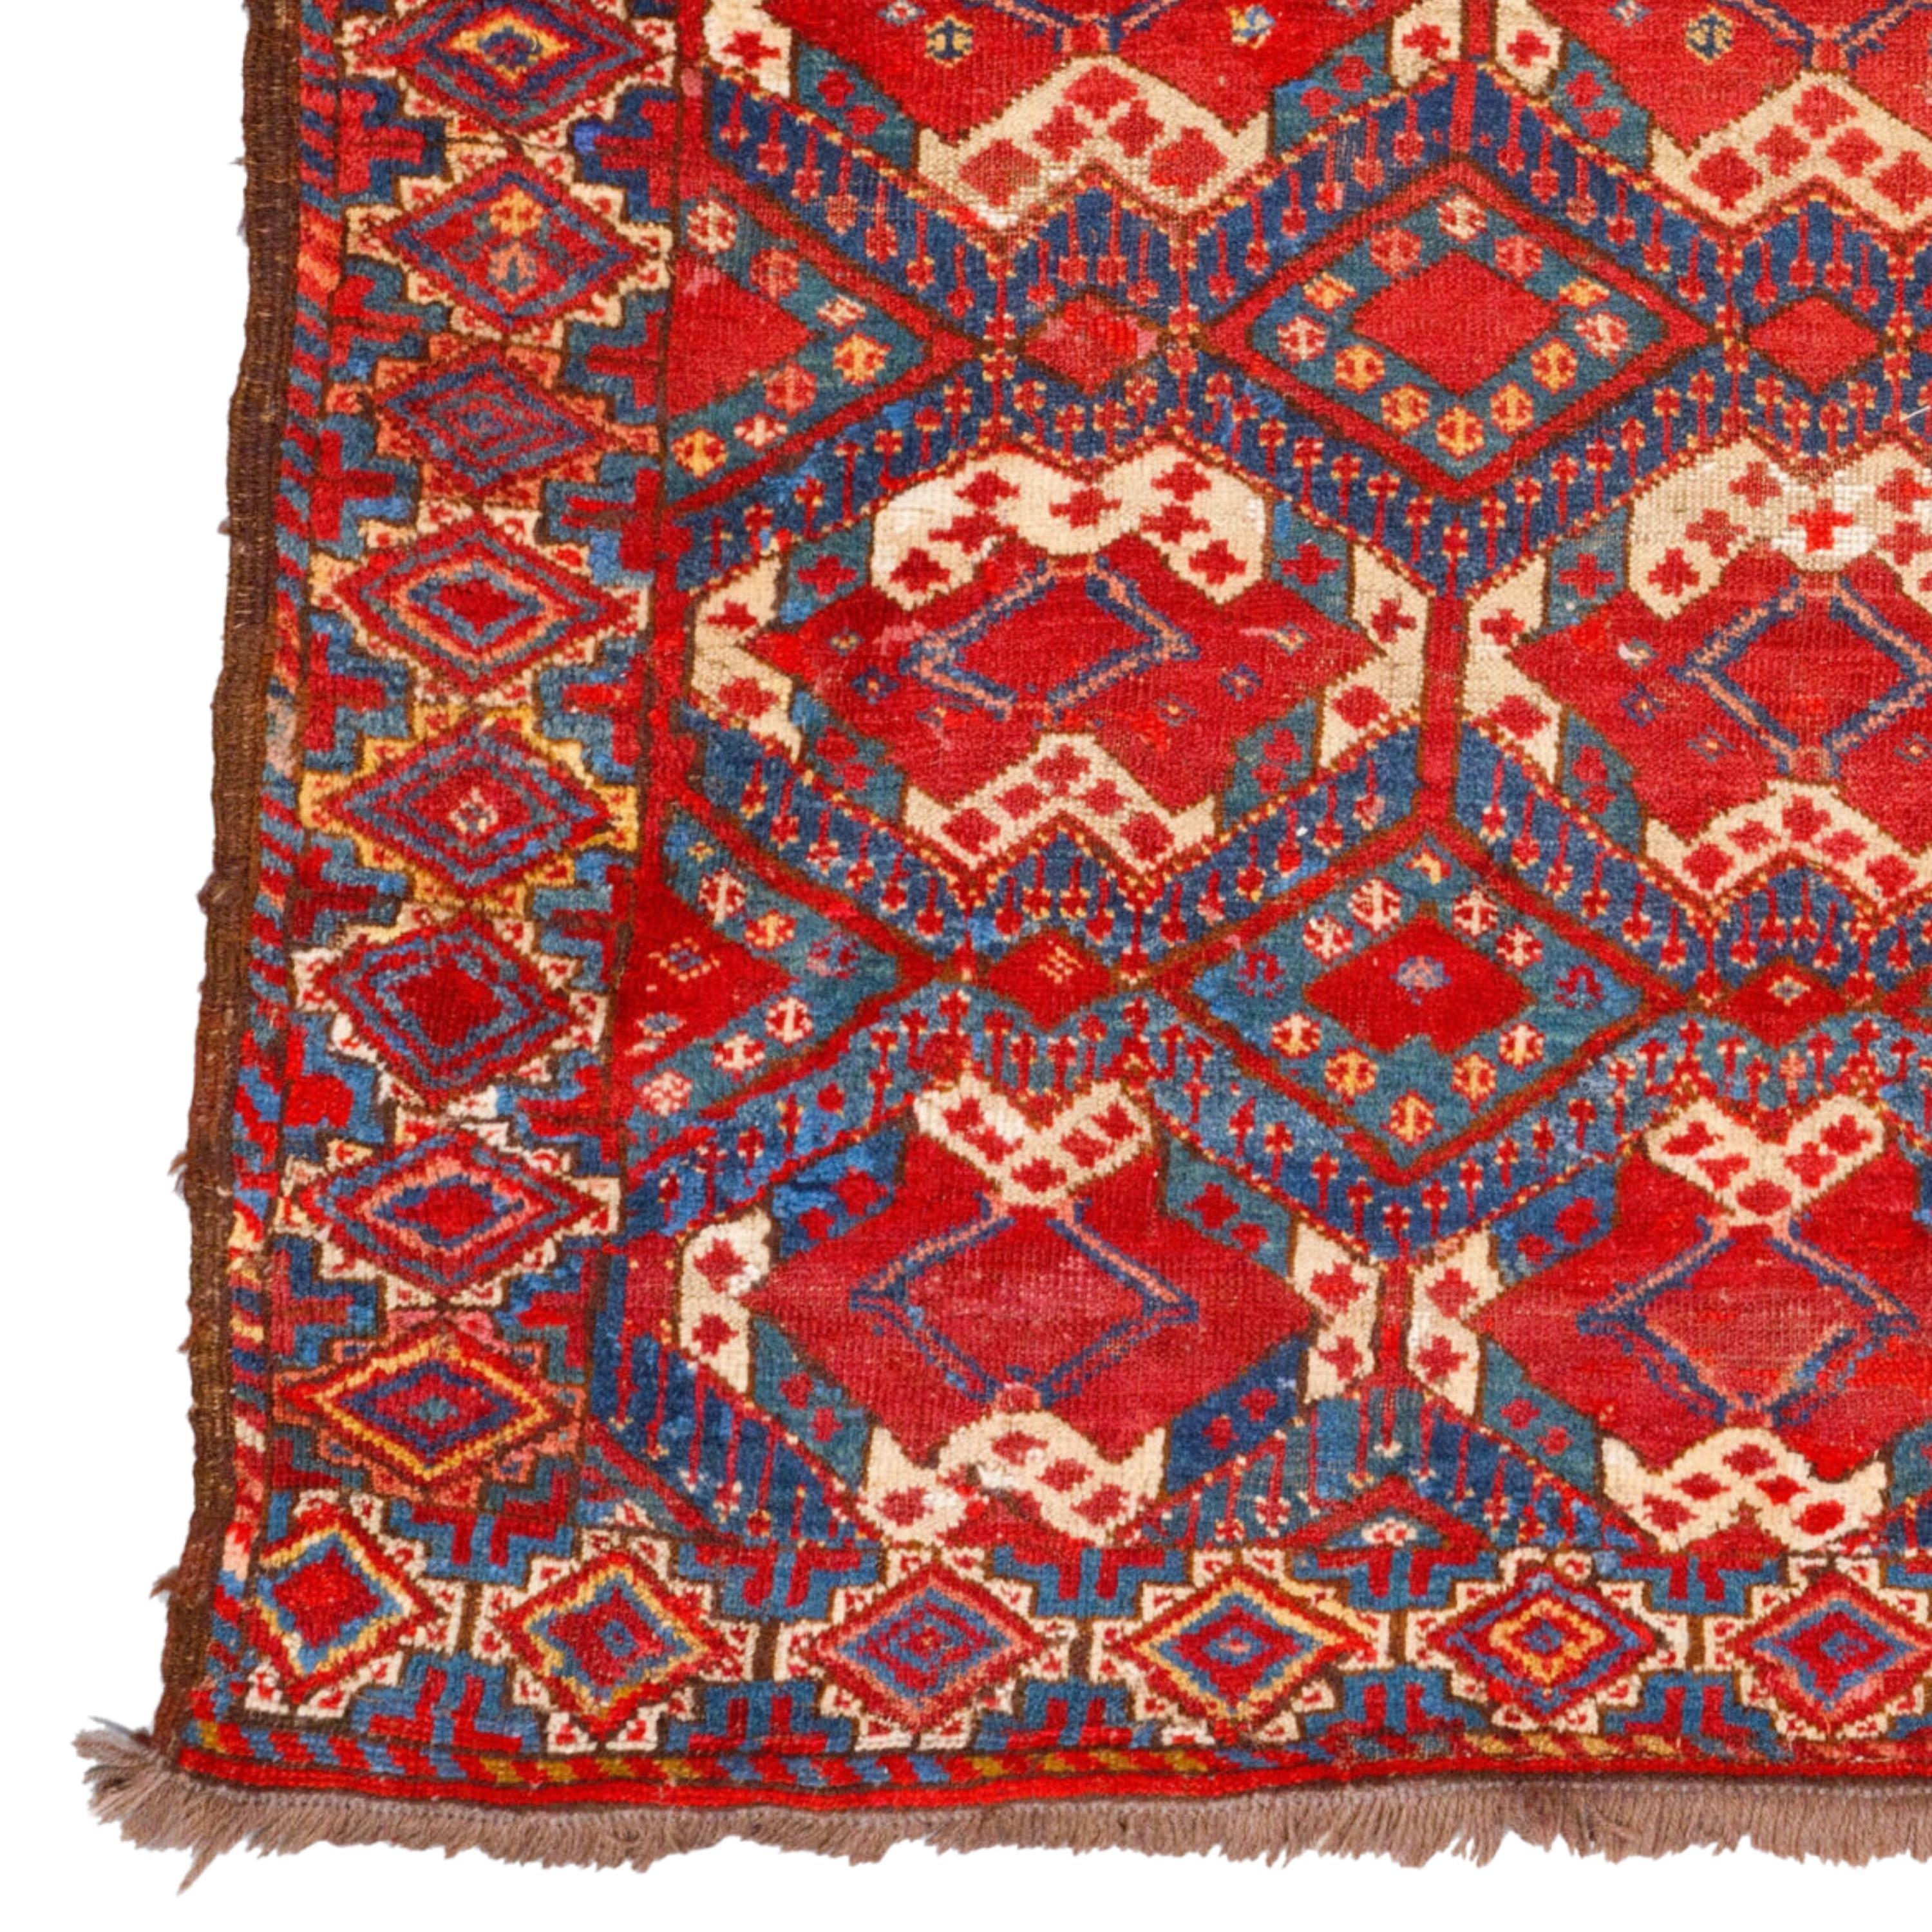 19th Century Antique Beshir Engsi
Size: 132×162 cm (51,96 x 63,77 In)

This elegant Turkmen Chodur Main carpet is a work of art from the mid-19th century. This rug in rich shades of red and burgundy is known for its carefully woven geometric